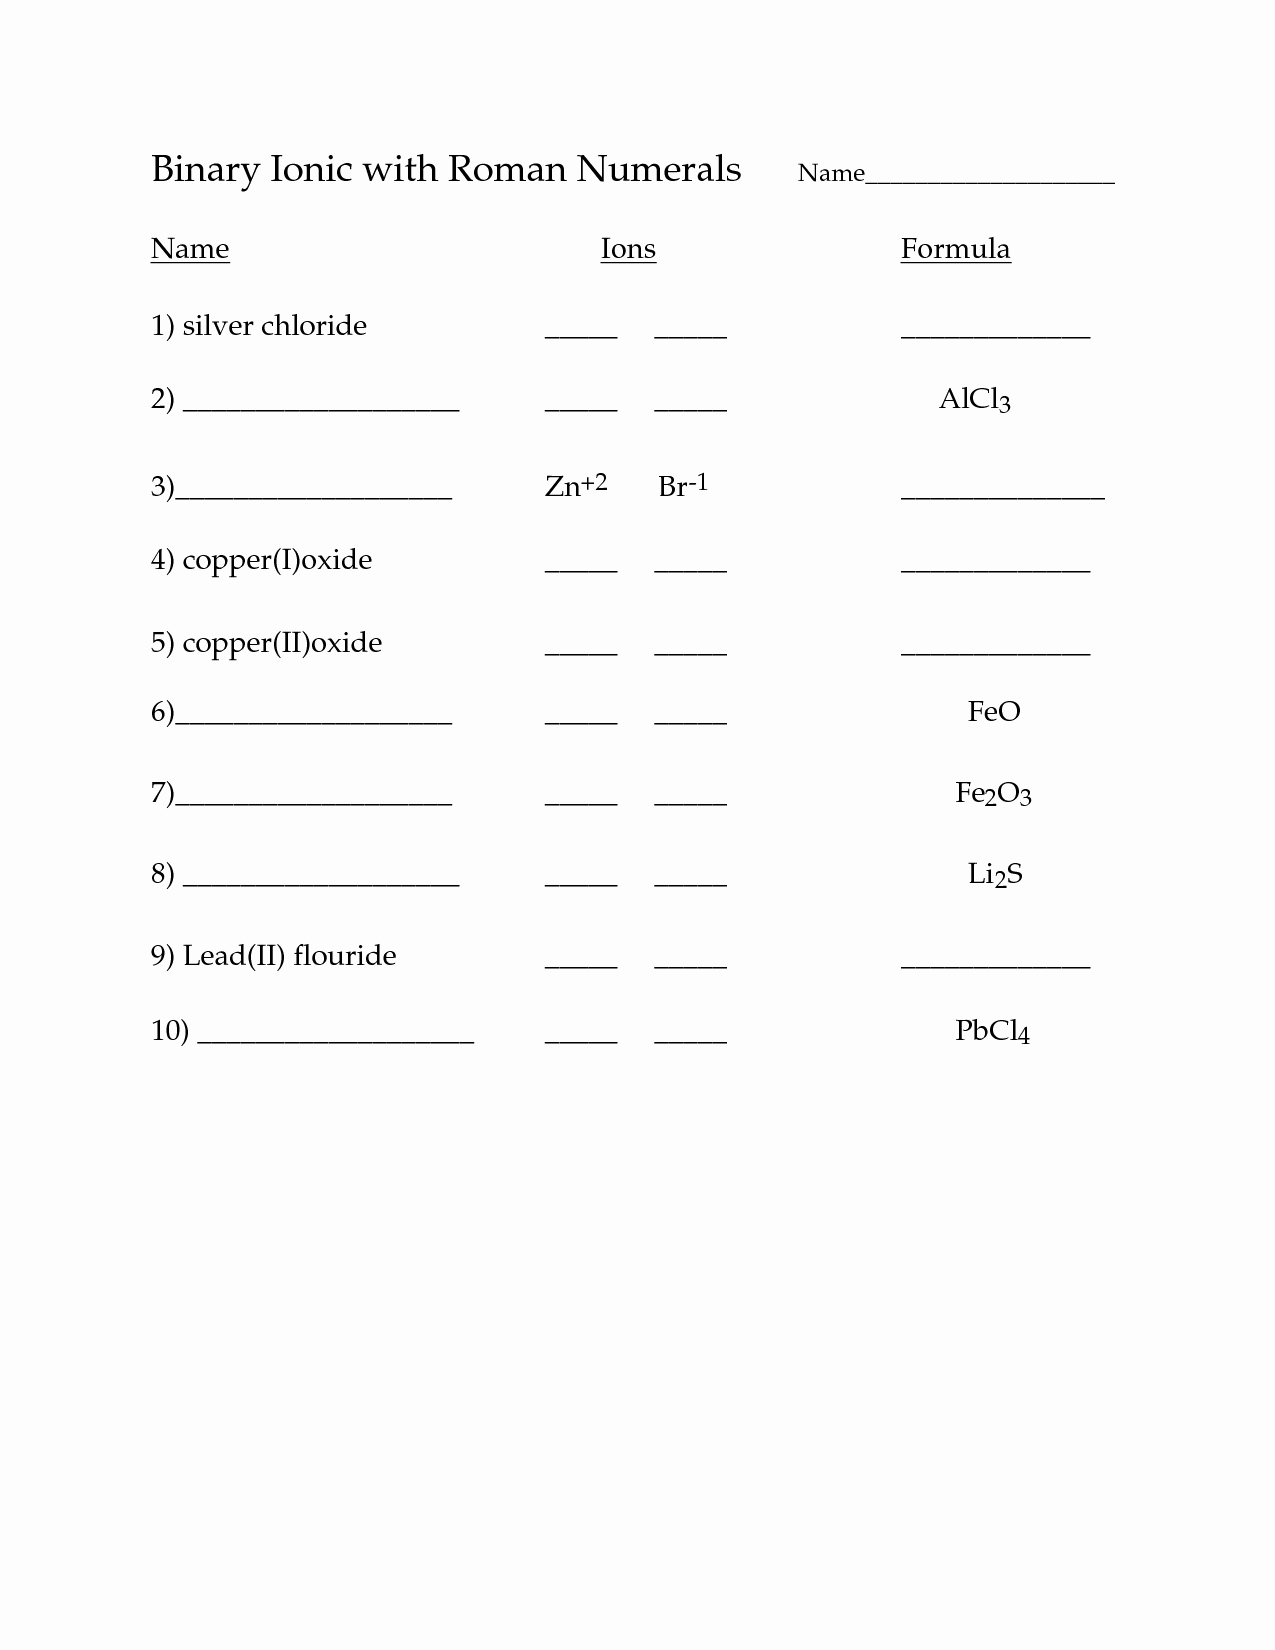 Naming Binary Ionic Compounds Worksheet Beautiful 47 Binary Ionic Pounds Worksheet Answers Binary Ionic